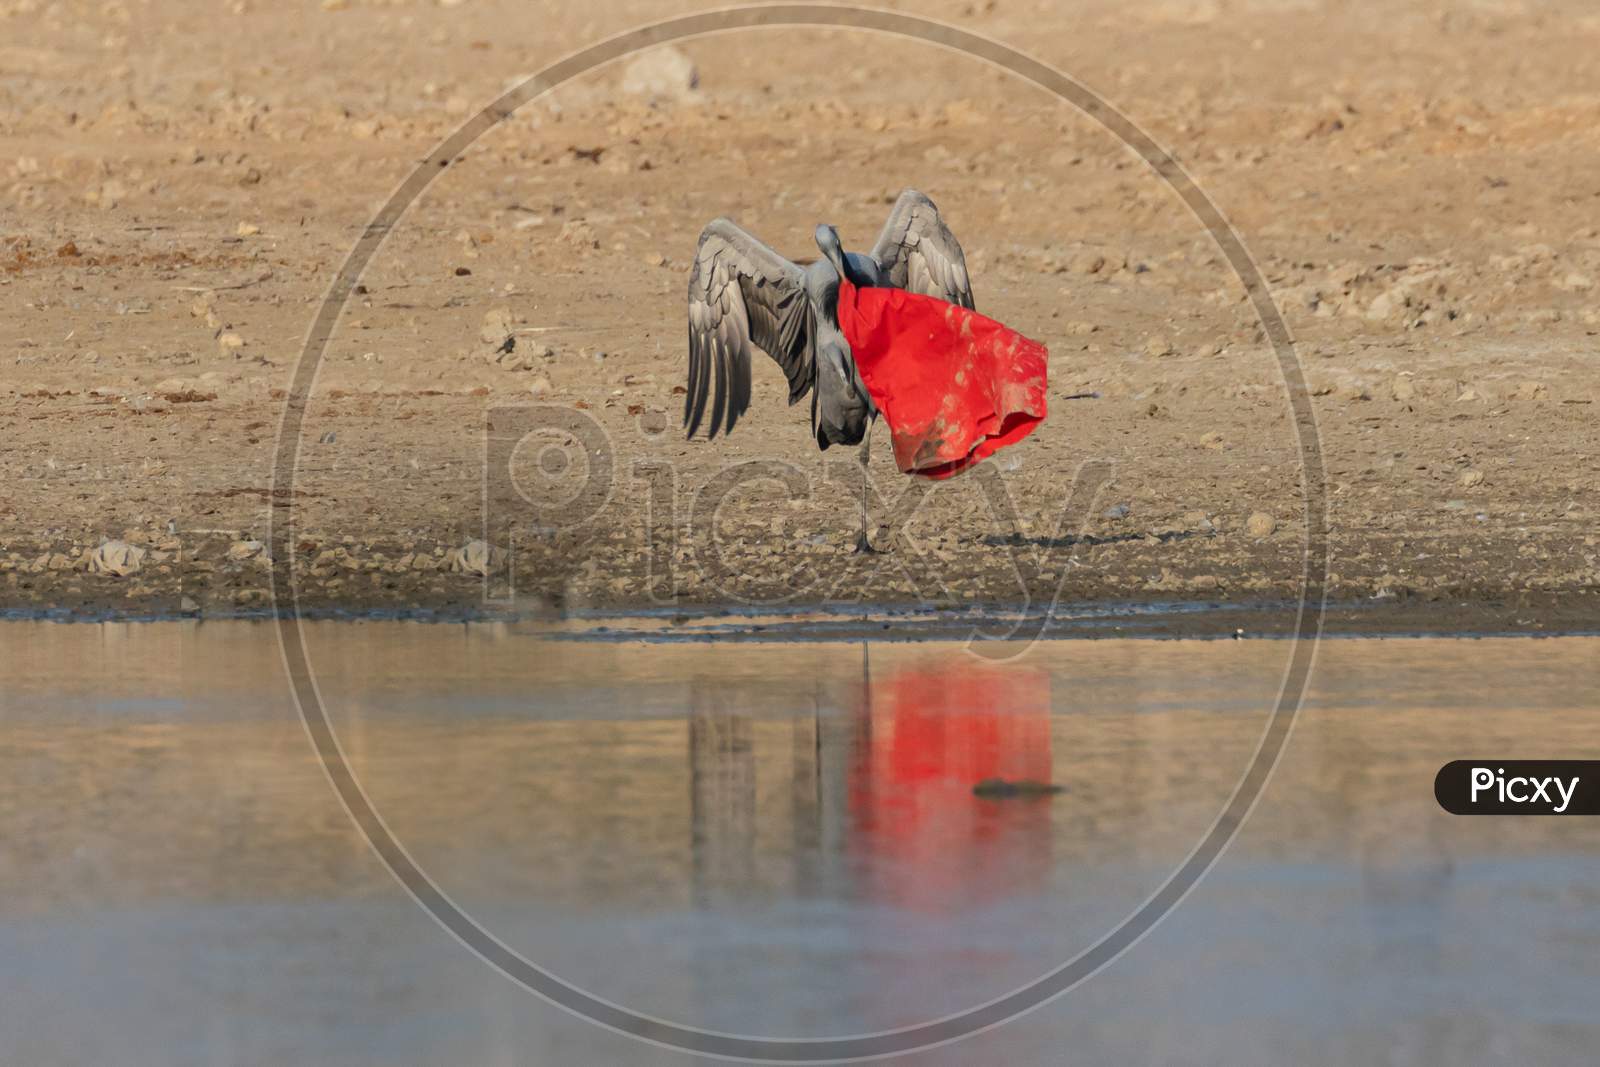 A piece of red cloth thrown carelessly stuck in the right toe of a Demoiselle crane